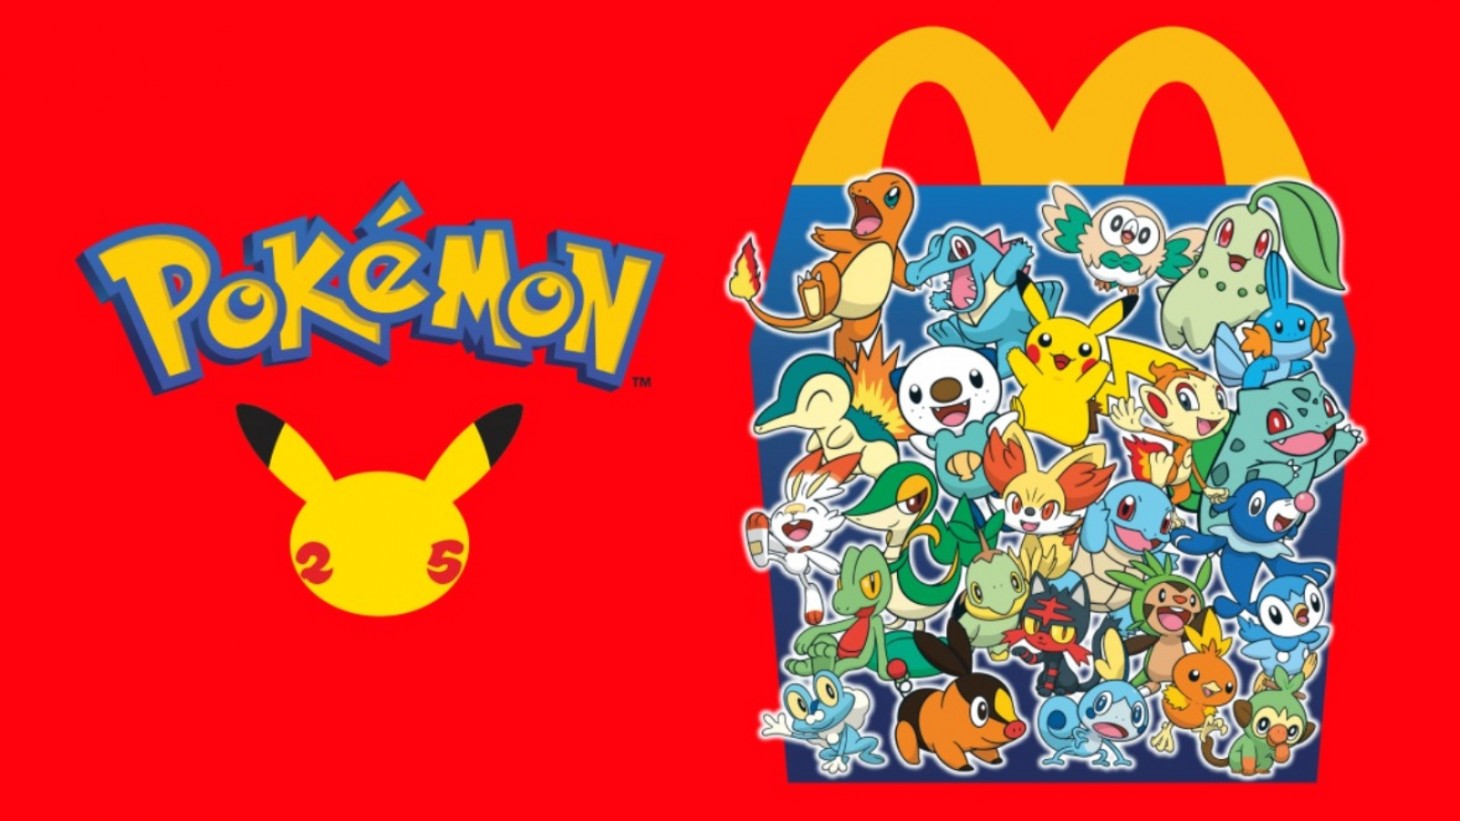 McDonald’s Pokémon Happy Meal Cards Are Selling Out Thanks To Adult